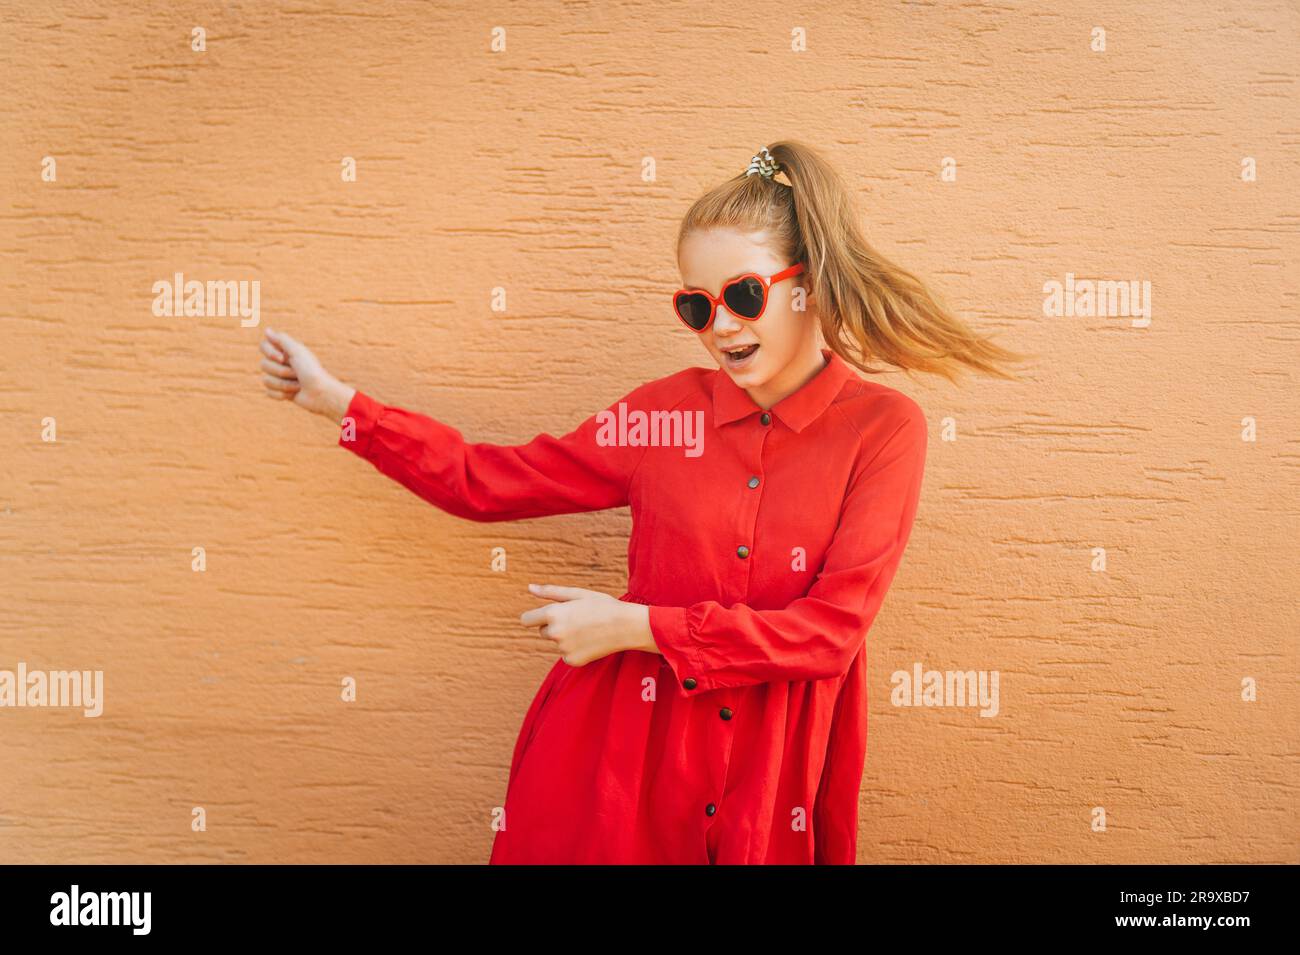 Happy dancing preteen girl, wearing red dress, heart shaped sunglasses, orange wall on background Stock Photo